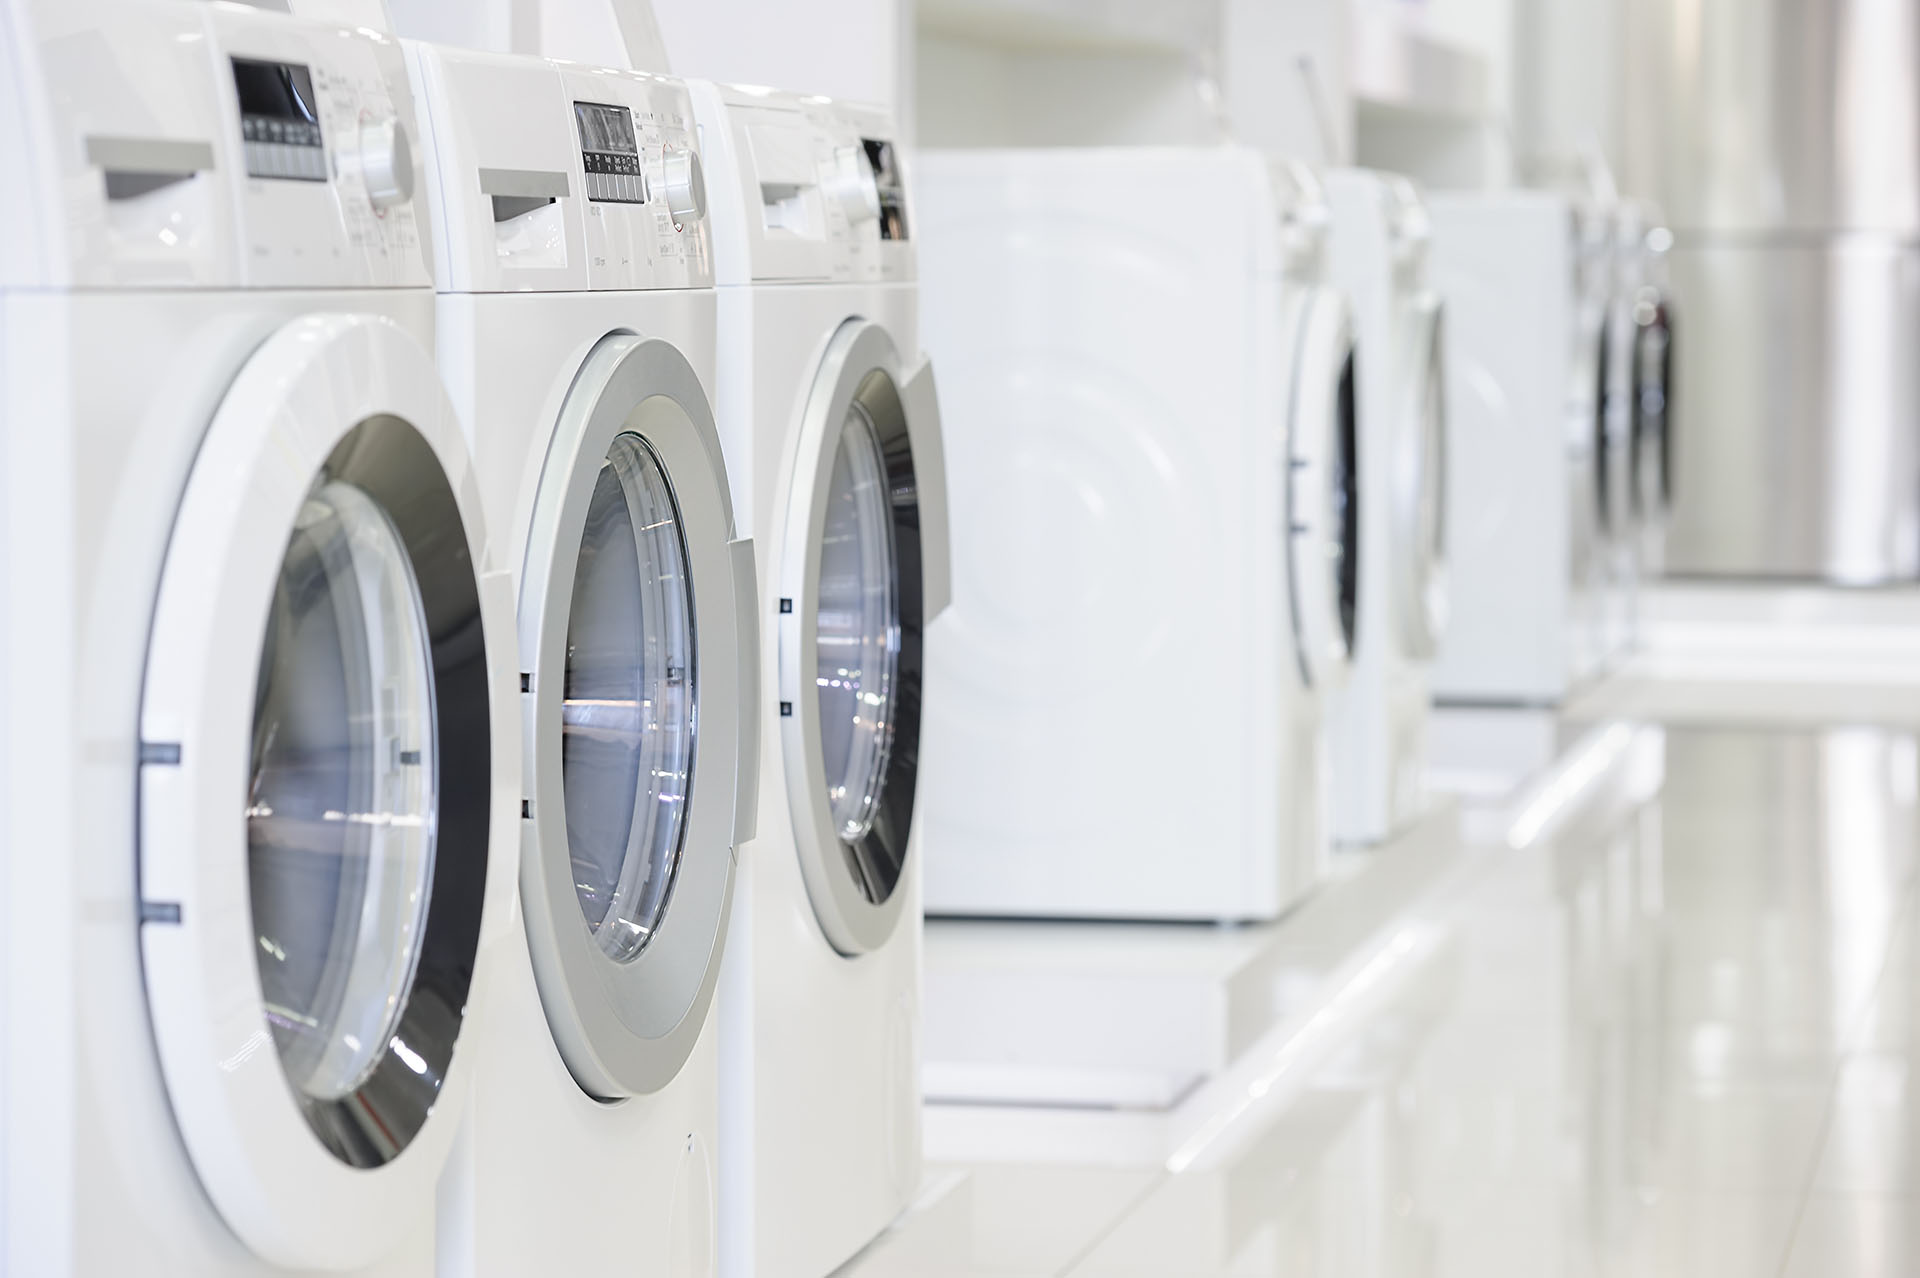 Washing machines, dryer and other domestic appliance equipment in the store